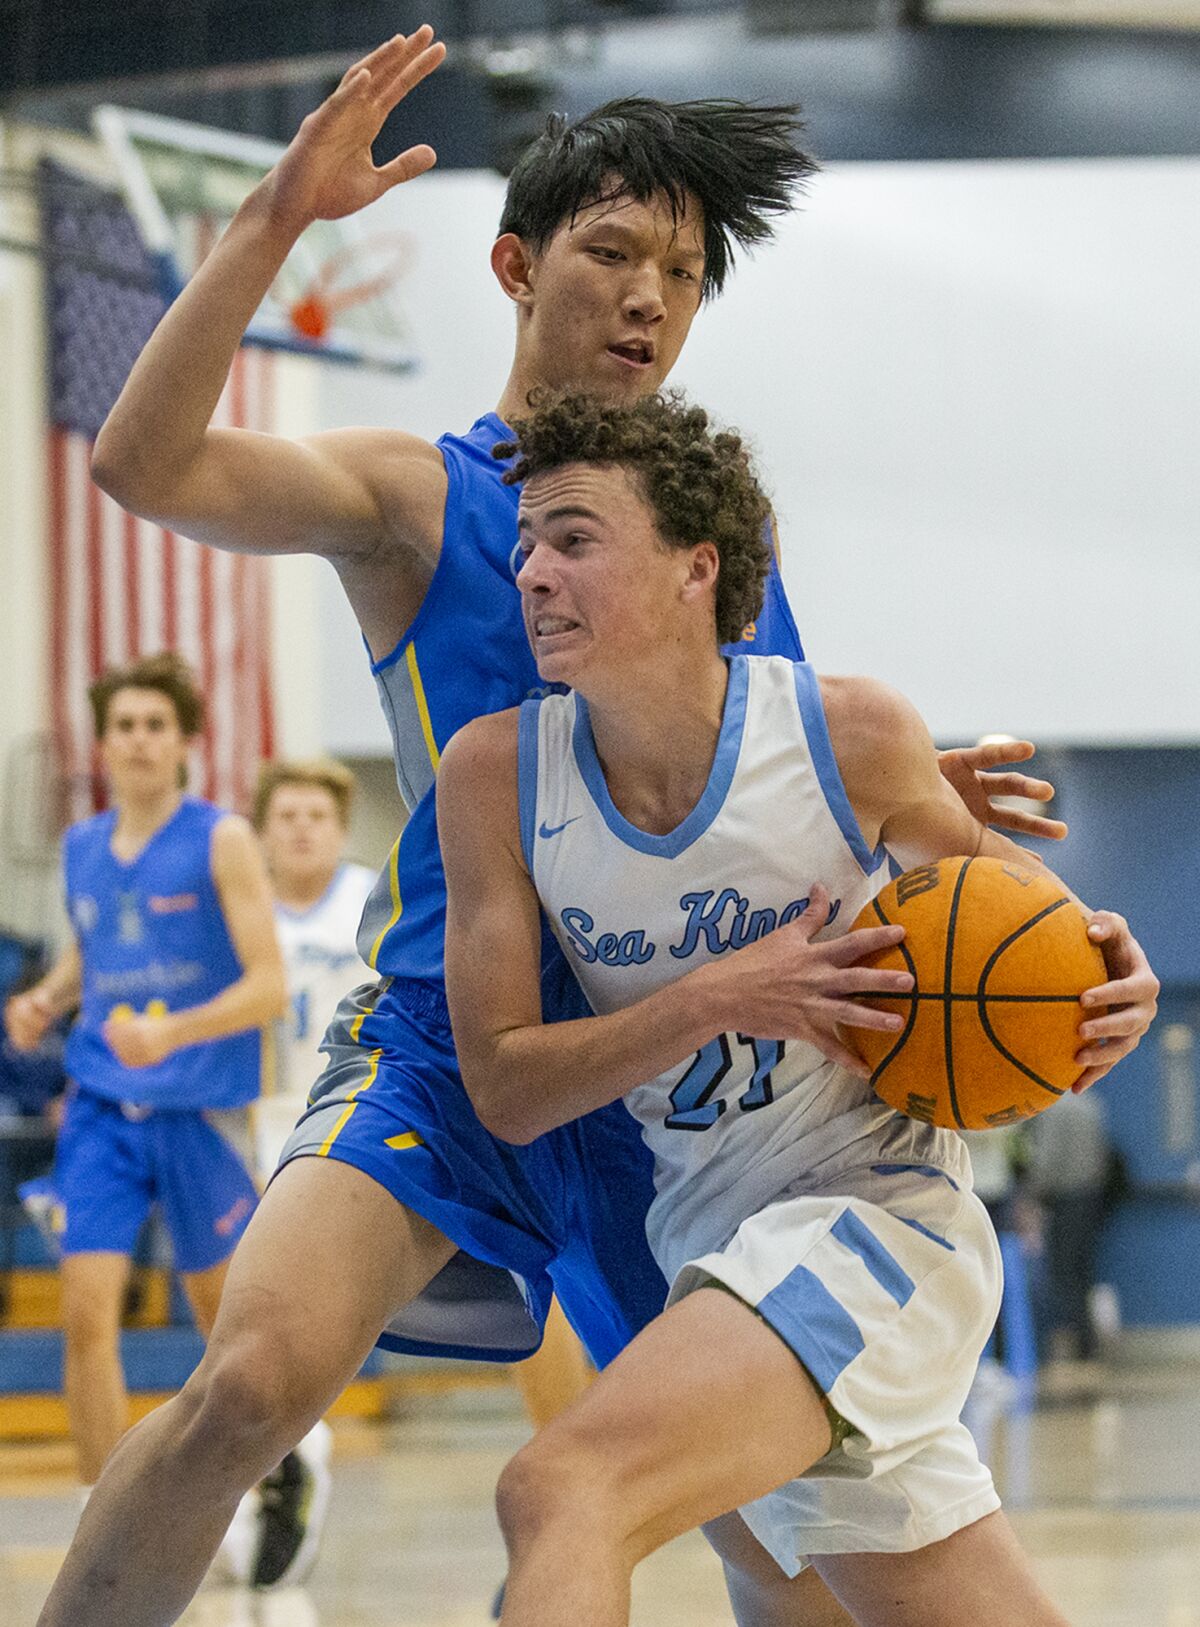 Corona del Mar's Everett Welton drives to the hoop against a Churchie defender during the CdM Beach Bash on Wednesday.